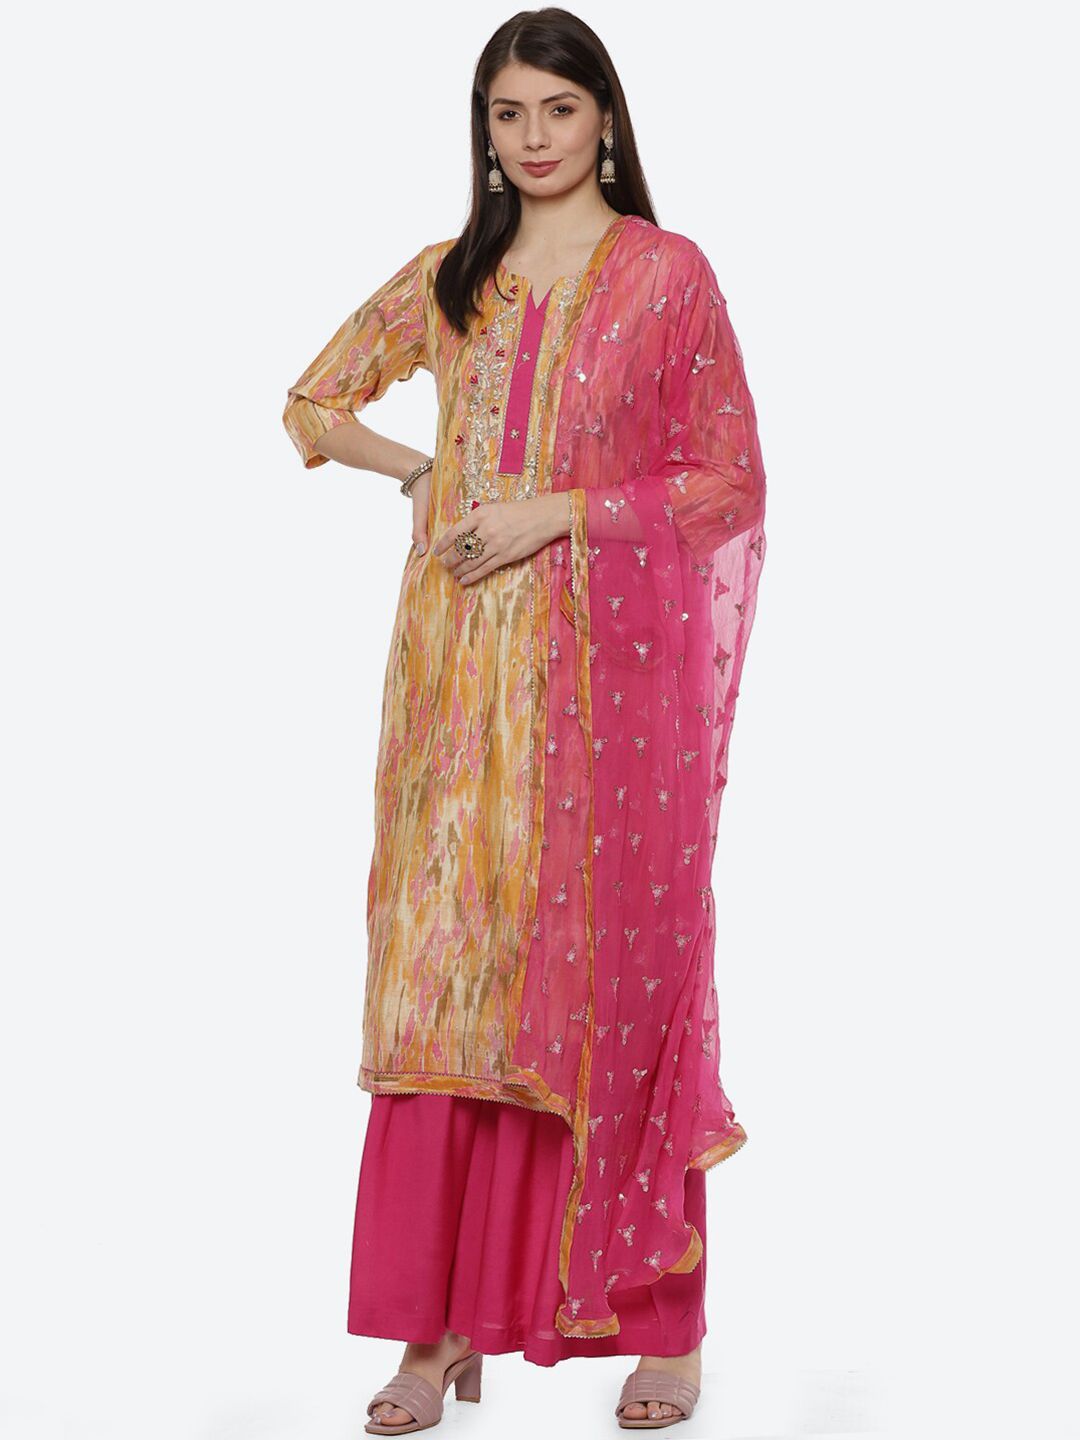 Biba Yellow & Pink Embellished Unstitched Dress Material Price in India